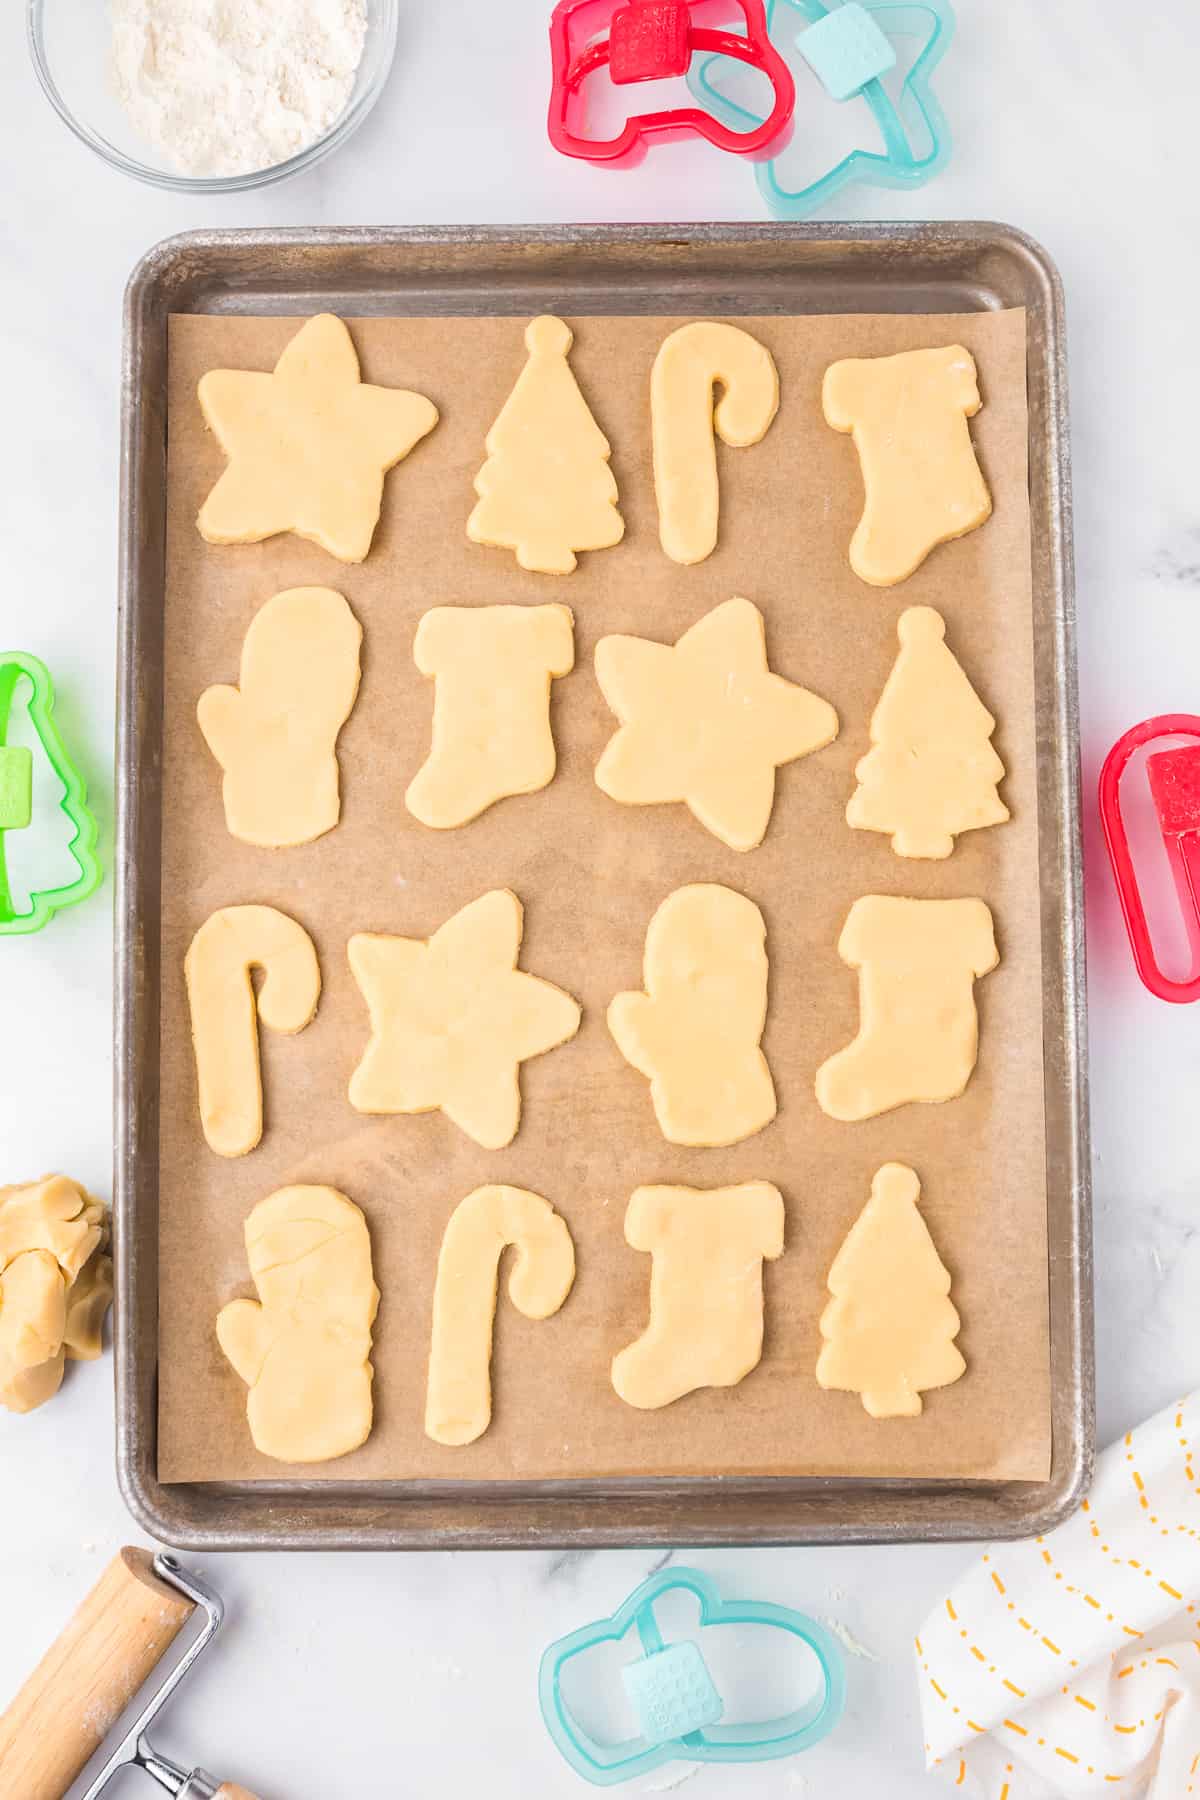 Sugar cookies cut out in candy canes, stars, trees and other christmas shapes on a cookie sheet from above.